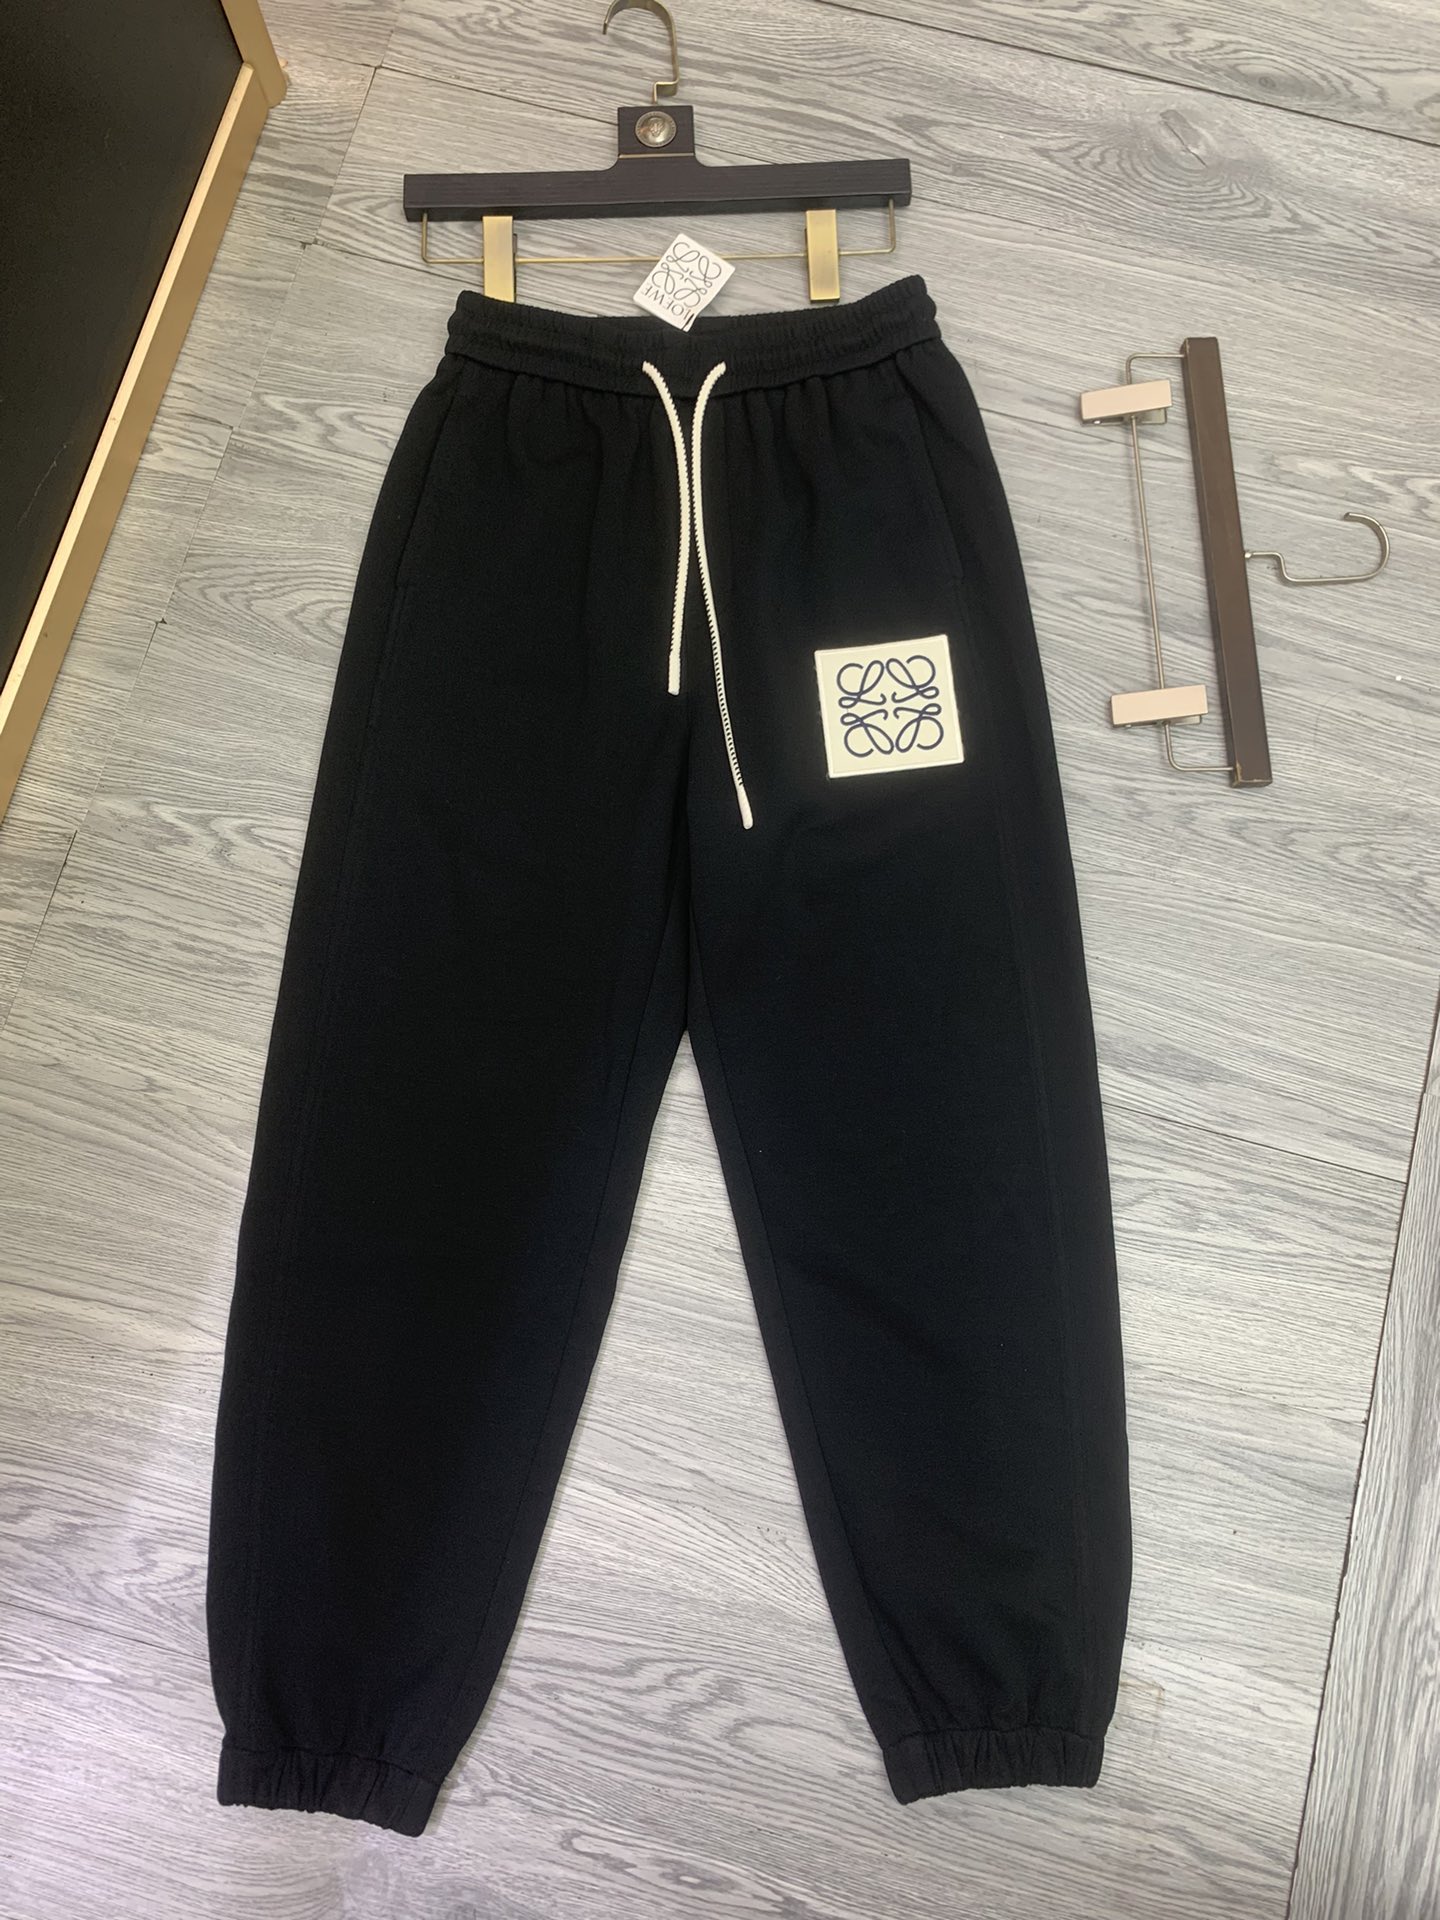 Loewe Clothing Pants & Trousers Cotton Knitting Fall Collection Casual